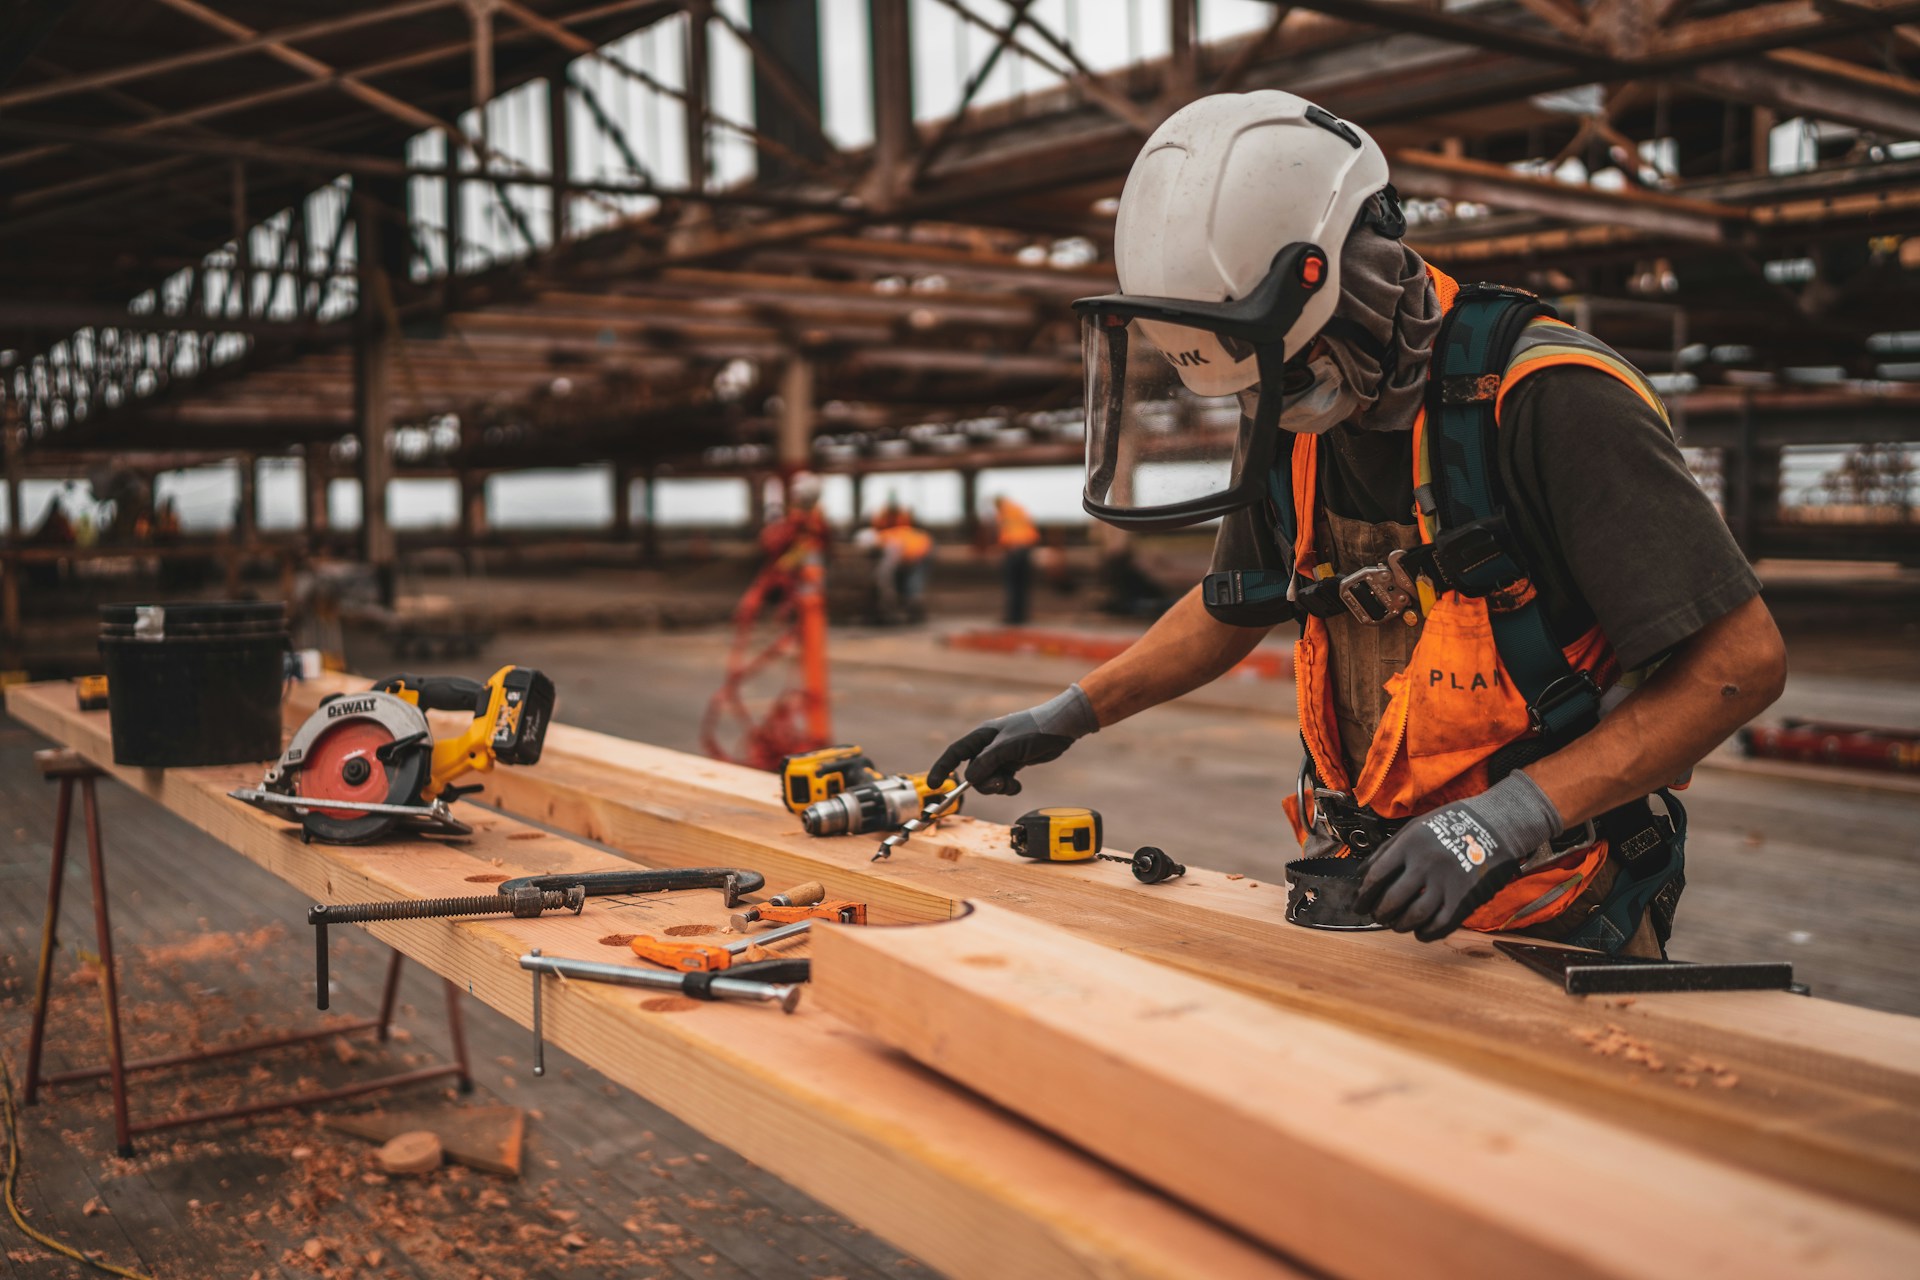 What to Do After a Workplace Injury in New Jersey